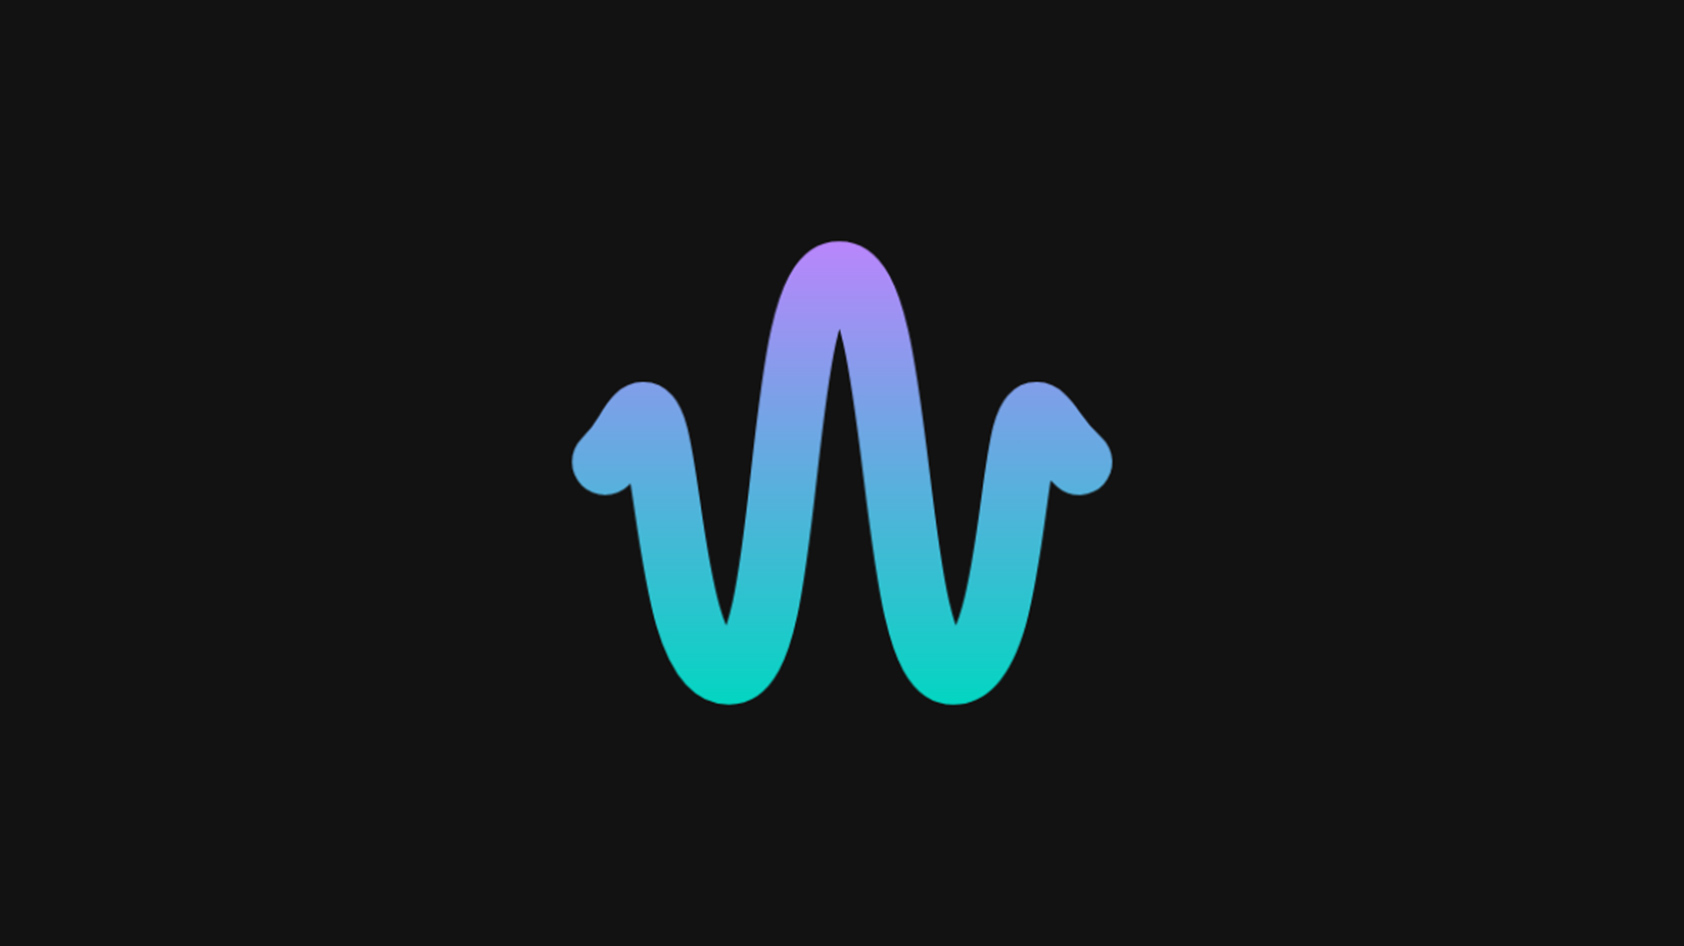 The Wavelet EQ app icon against a black background.